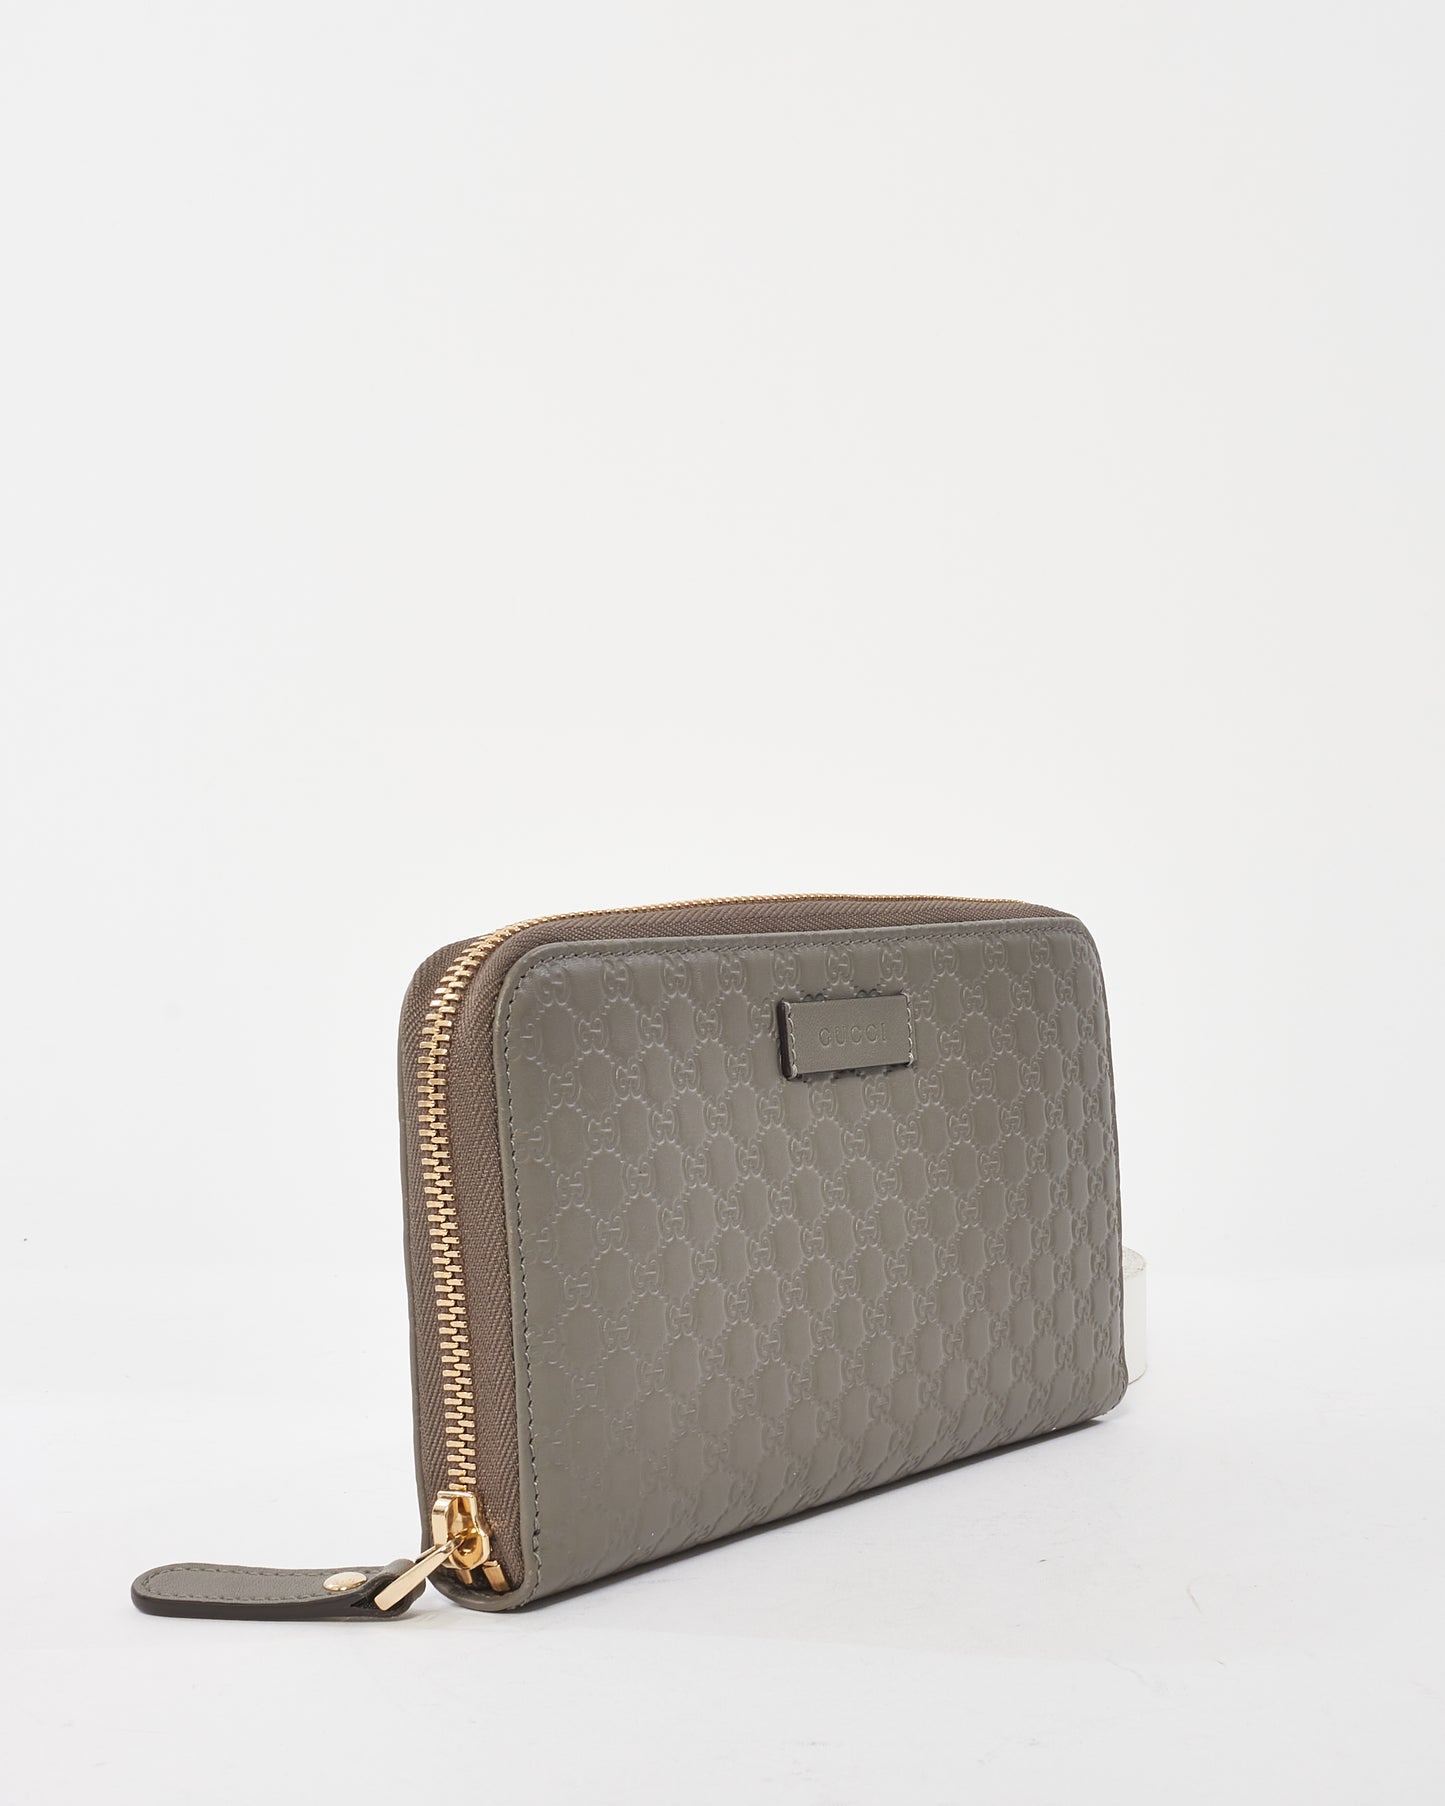 Gucci Grey Leather Guccissima Long Zip Wallet